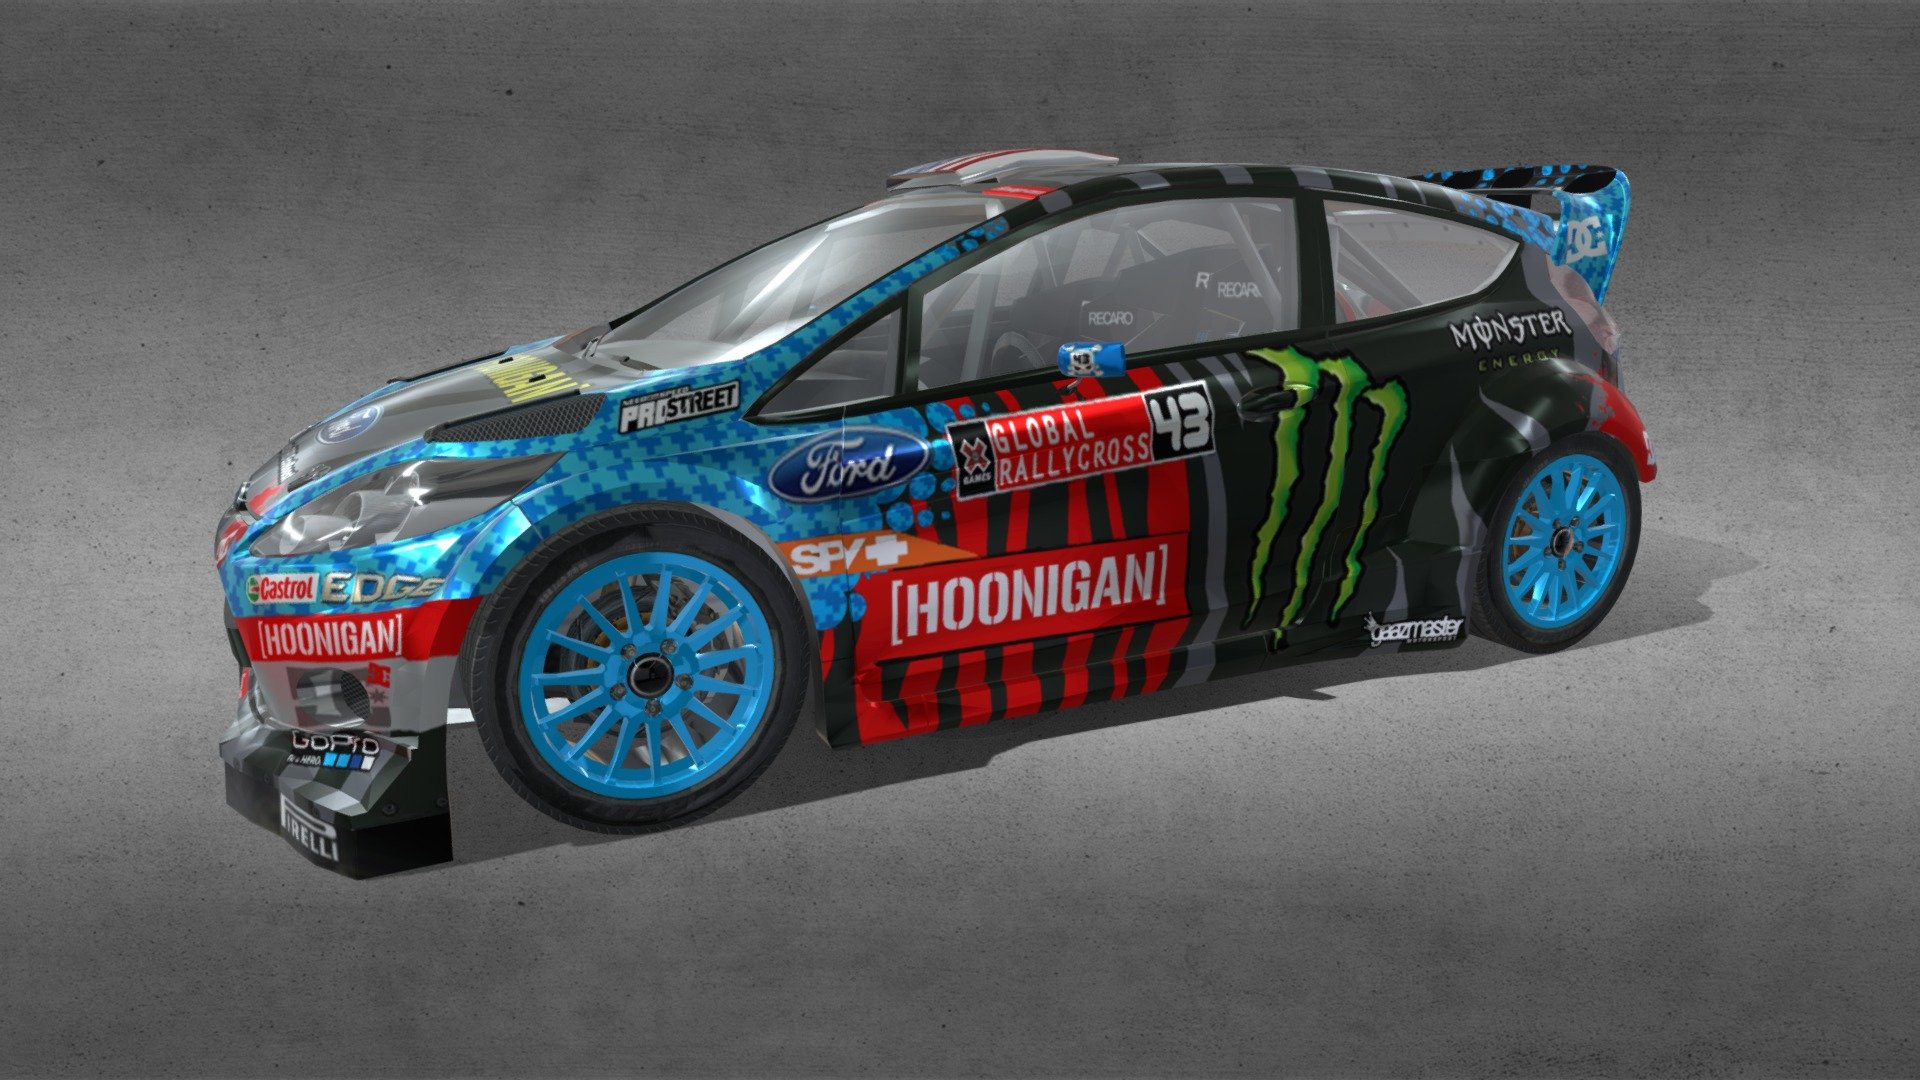 This is a Low poly 3d car model of a 2013 Ford Fiesta Ken Block Gymkhana with 4 different liveries. All done in Blender 2.93 and Photoshop for the textures and liveries..For download send msg to my email: dsm350@gmail.com 

Photo's Liveries here:
https://drive.google.com/file/d/10doEpfY5i-yevGGYb2xihs8OcymBL9IA/view?usp=sharing

https://drive.google.com/file/d/1ImDs7dE6M4LFuCM8IqpGhOl1B8OVpTzy/view?usp=sharing

https://drive.google.com/file/d/1qDerFRWjkzYc6Od4SmfzI2ZTfkYlKjs9/view?usp=sharing

https://drive.google.com/file/d/1SJ7ASJGqH5KvRVDoEFa4NJJjrrlidCsg/view?usp=sharing - 2013 Ford Fiesta Ken Block Gymkhana - 3D model by All-Wide (@dsm350) 3d model